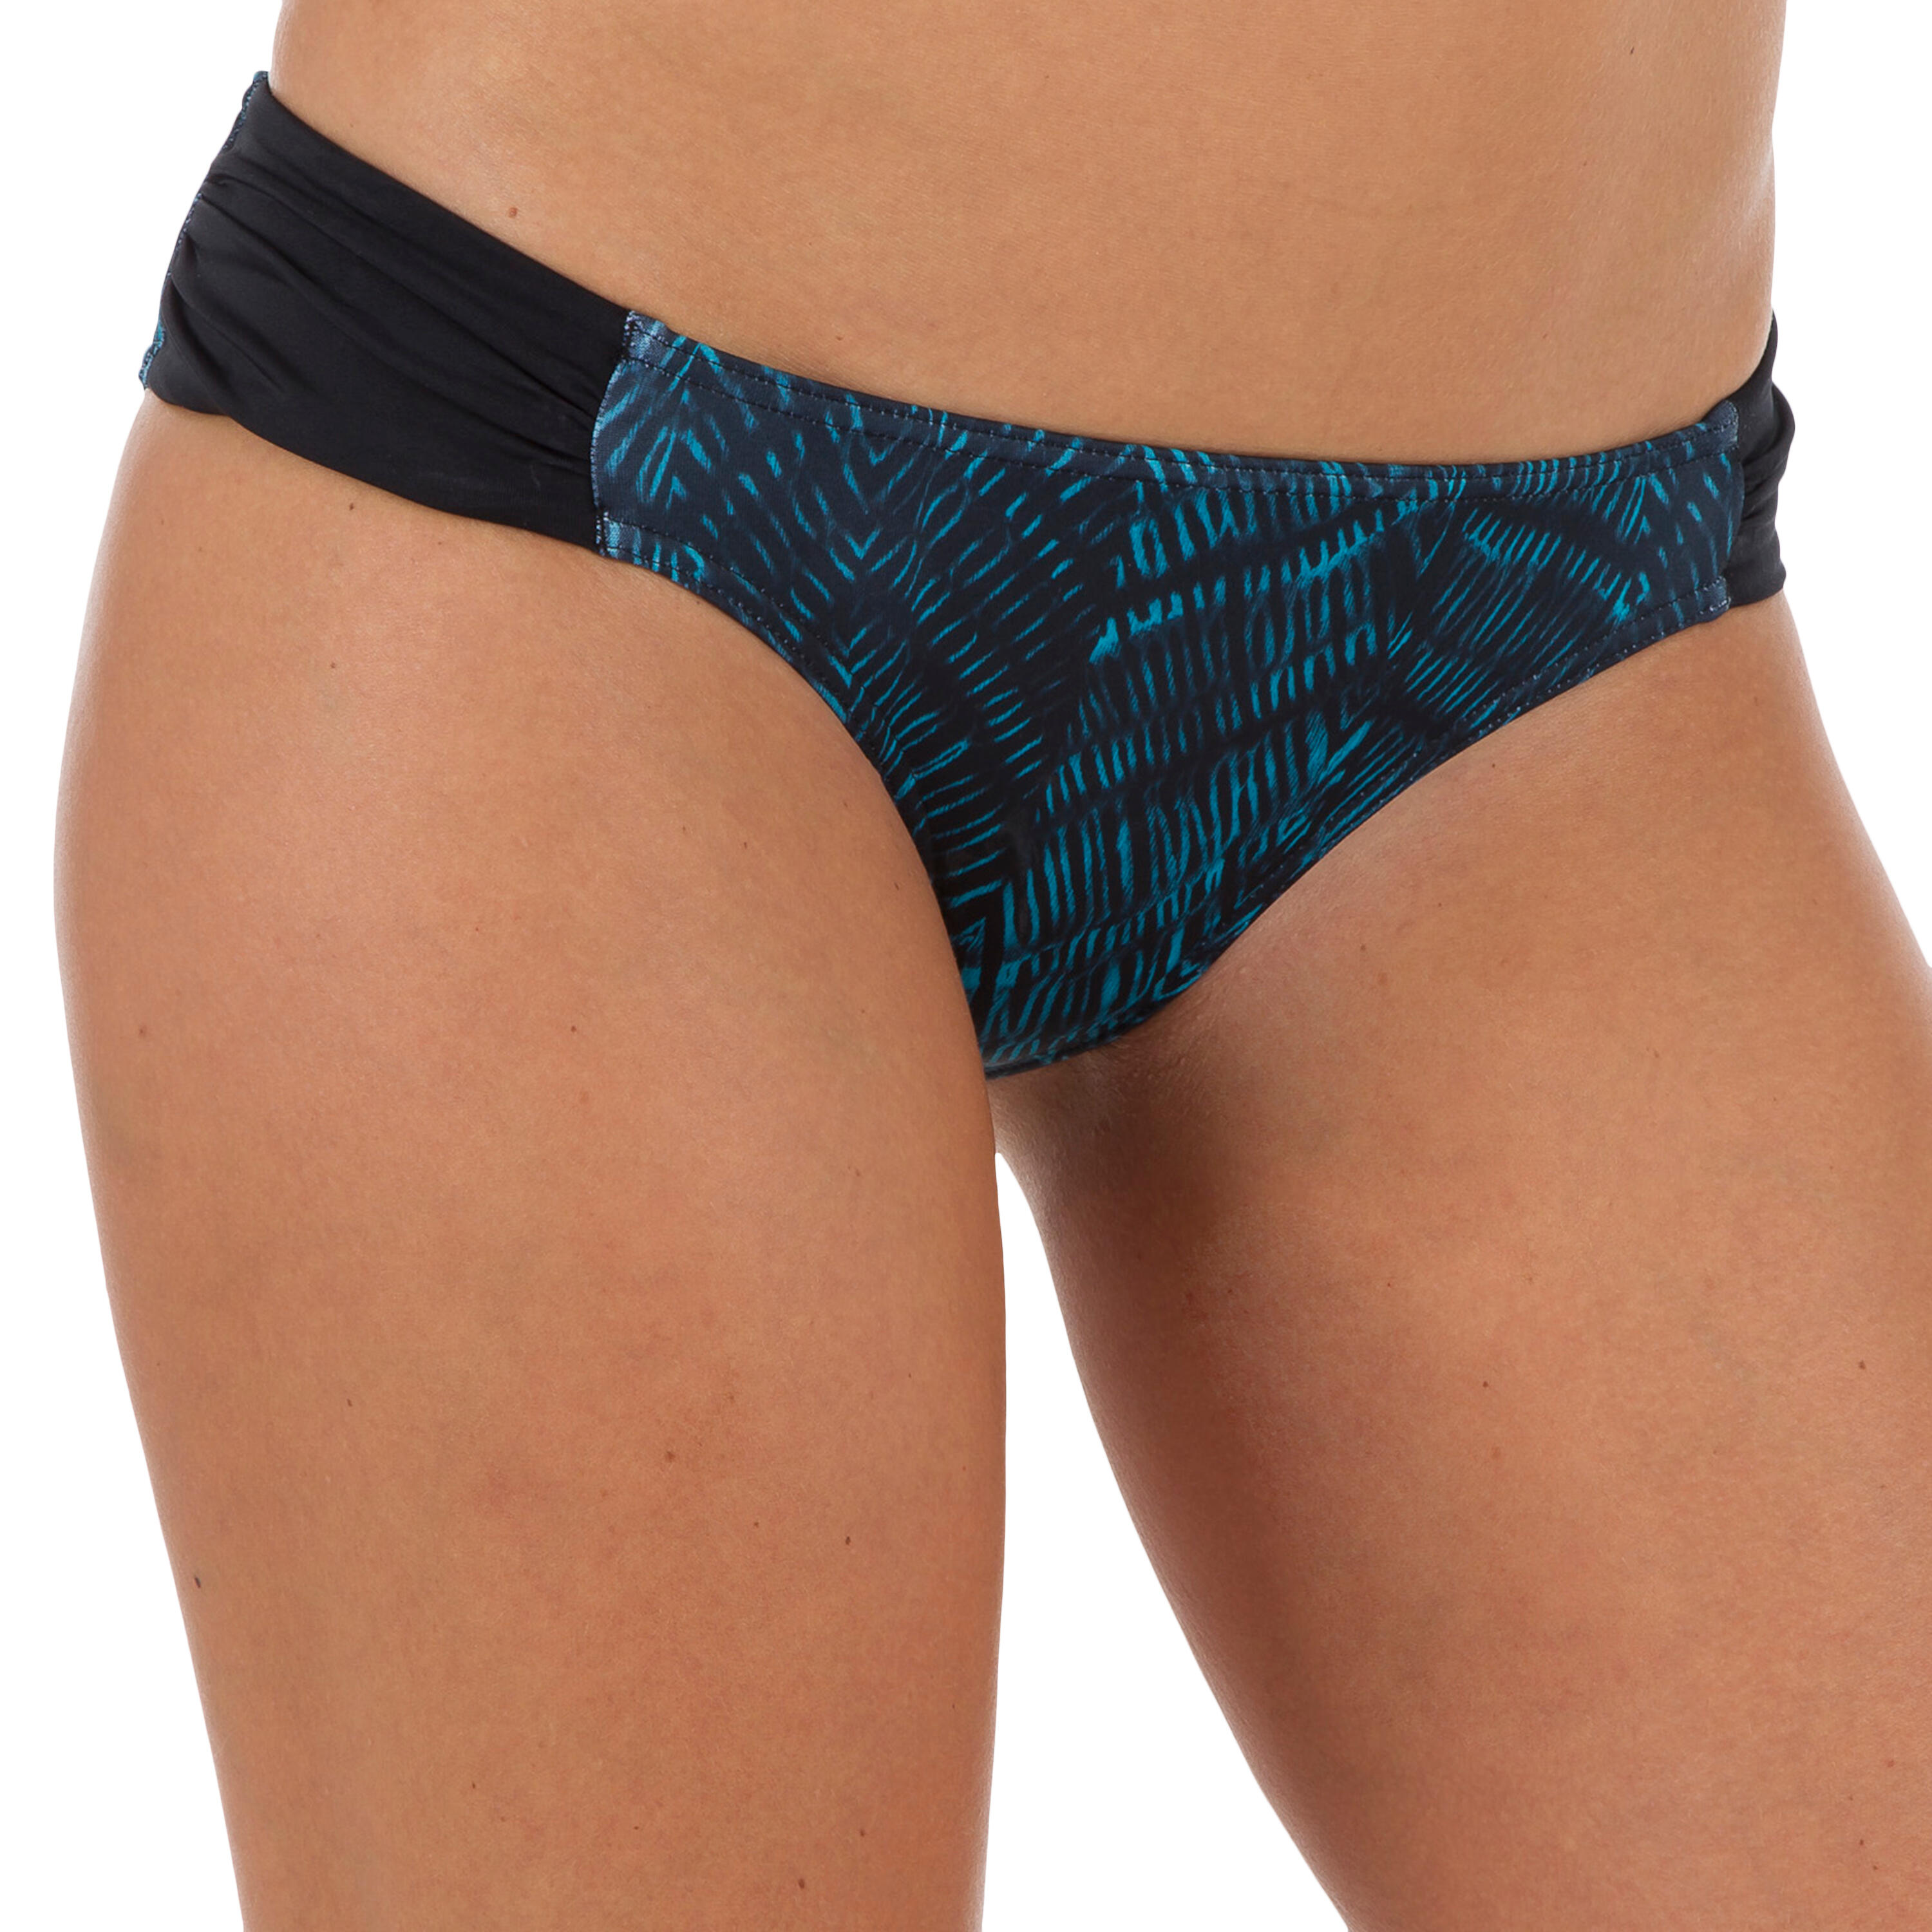 Niki Women's Surfing Swimsuit Bottoms with Gathering at the Sides - Shibo Blue 1/7